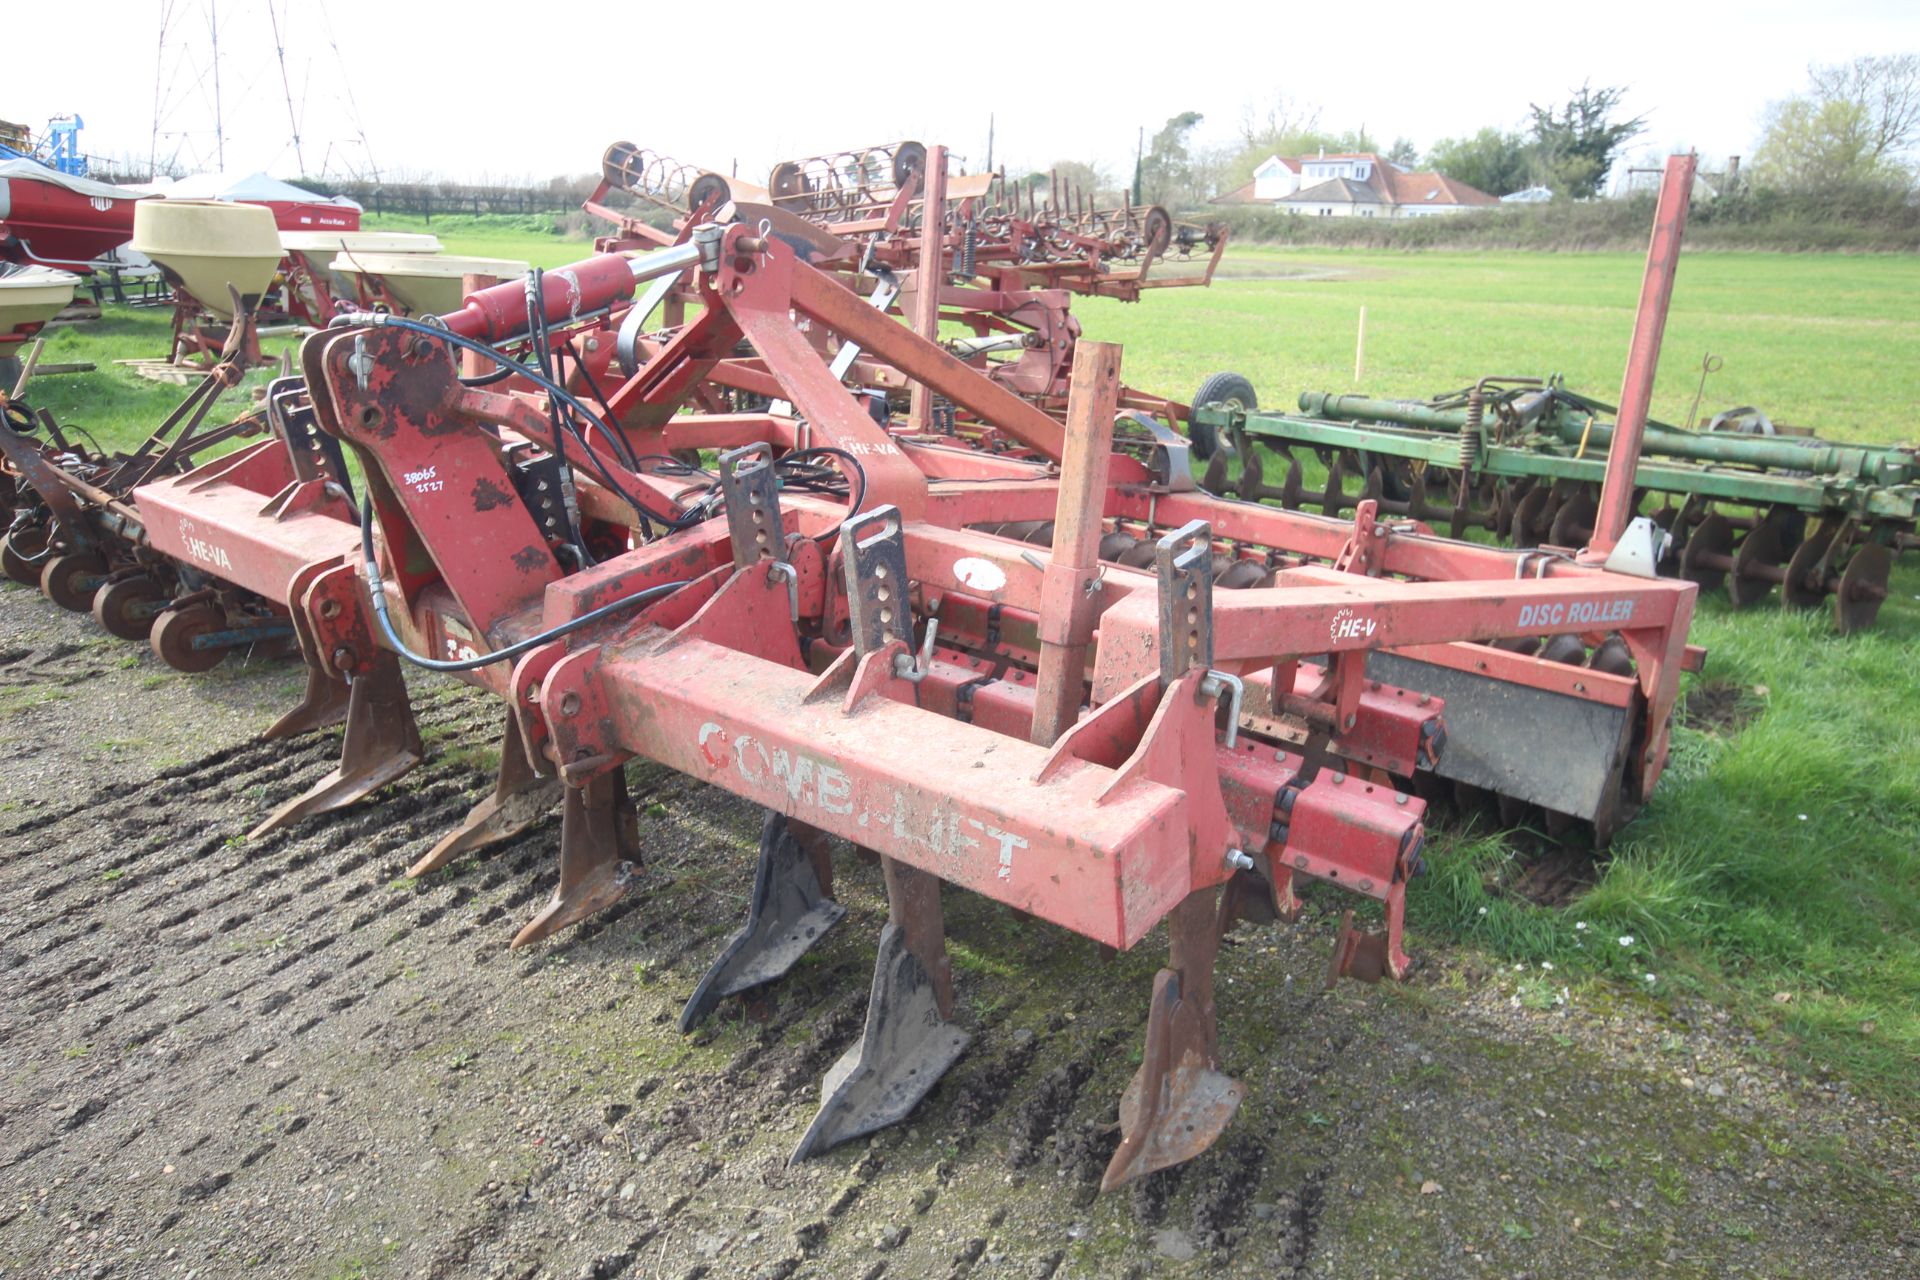 HeVa 3.5m Combi-Lift 7 lege subsoiler. Coupled to HeVa Disc Roller. Comprising two rows of discs and